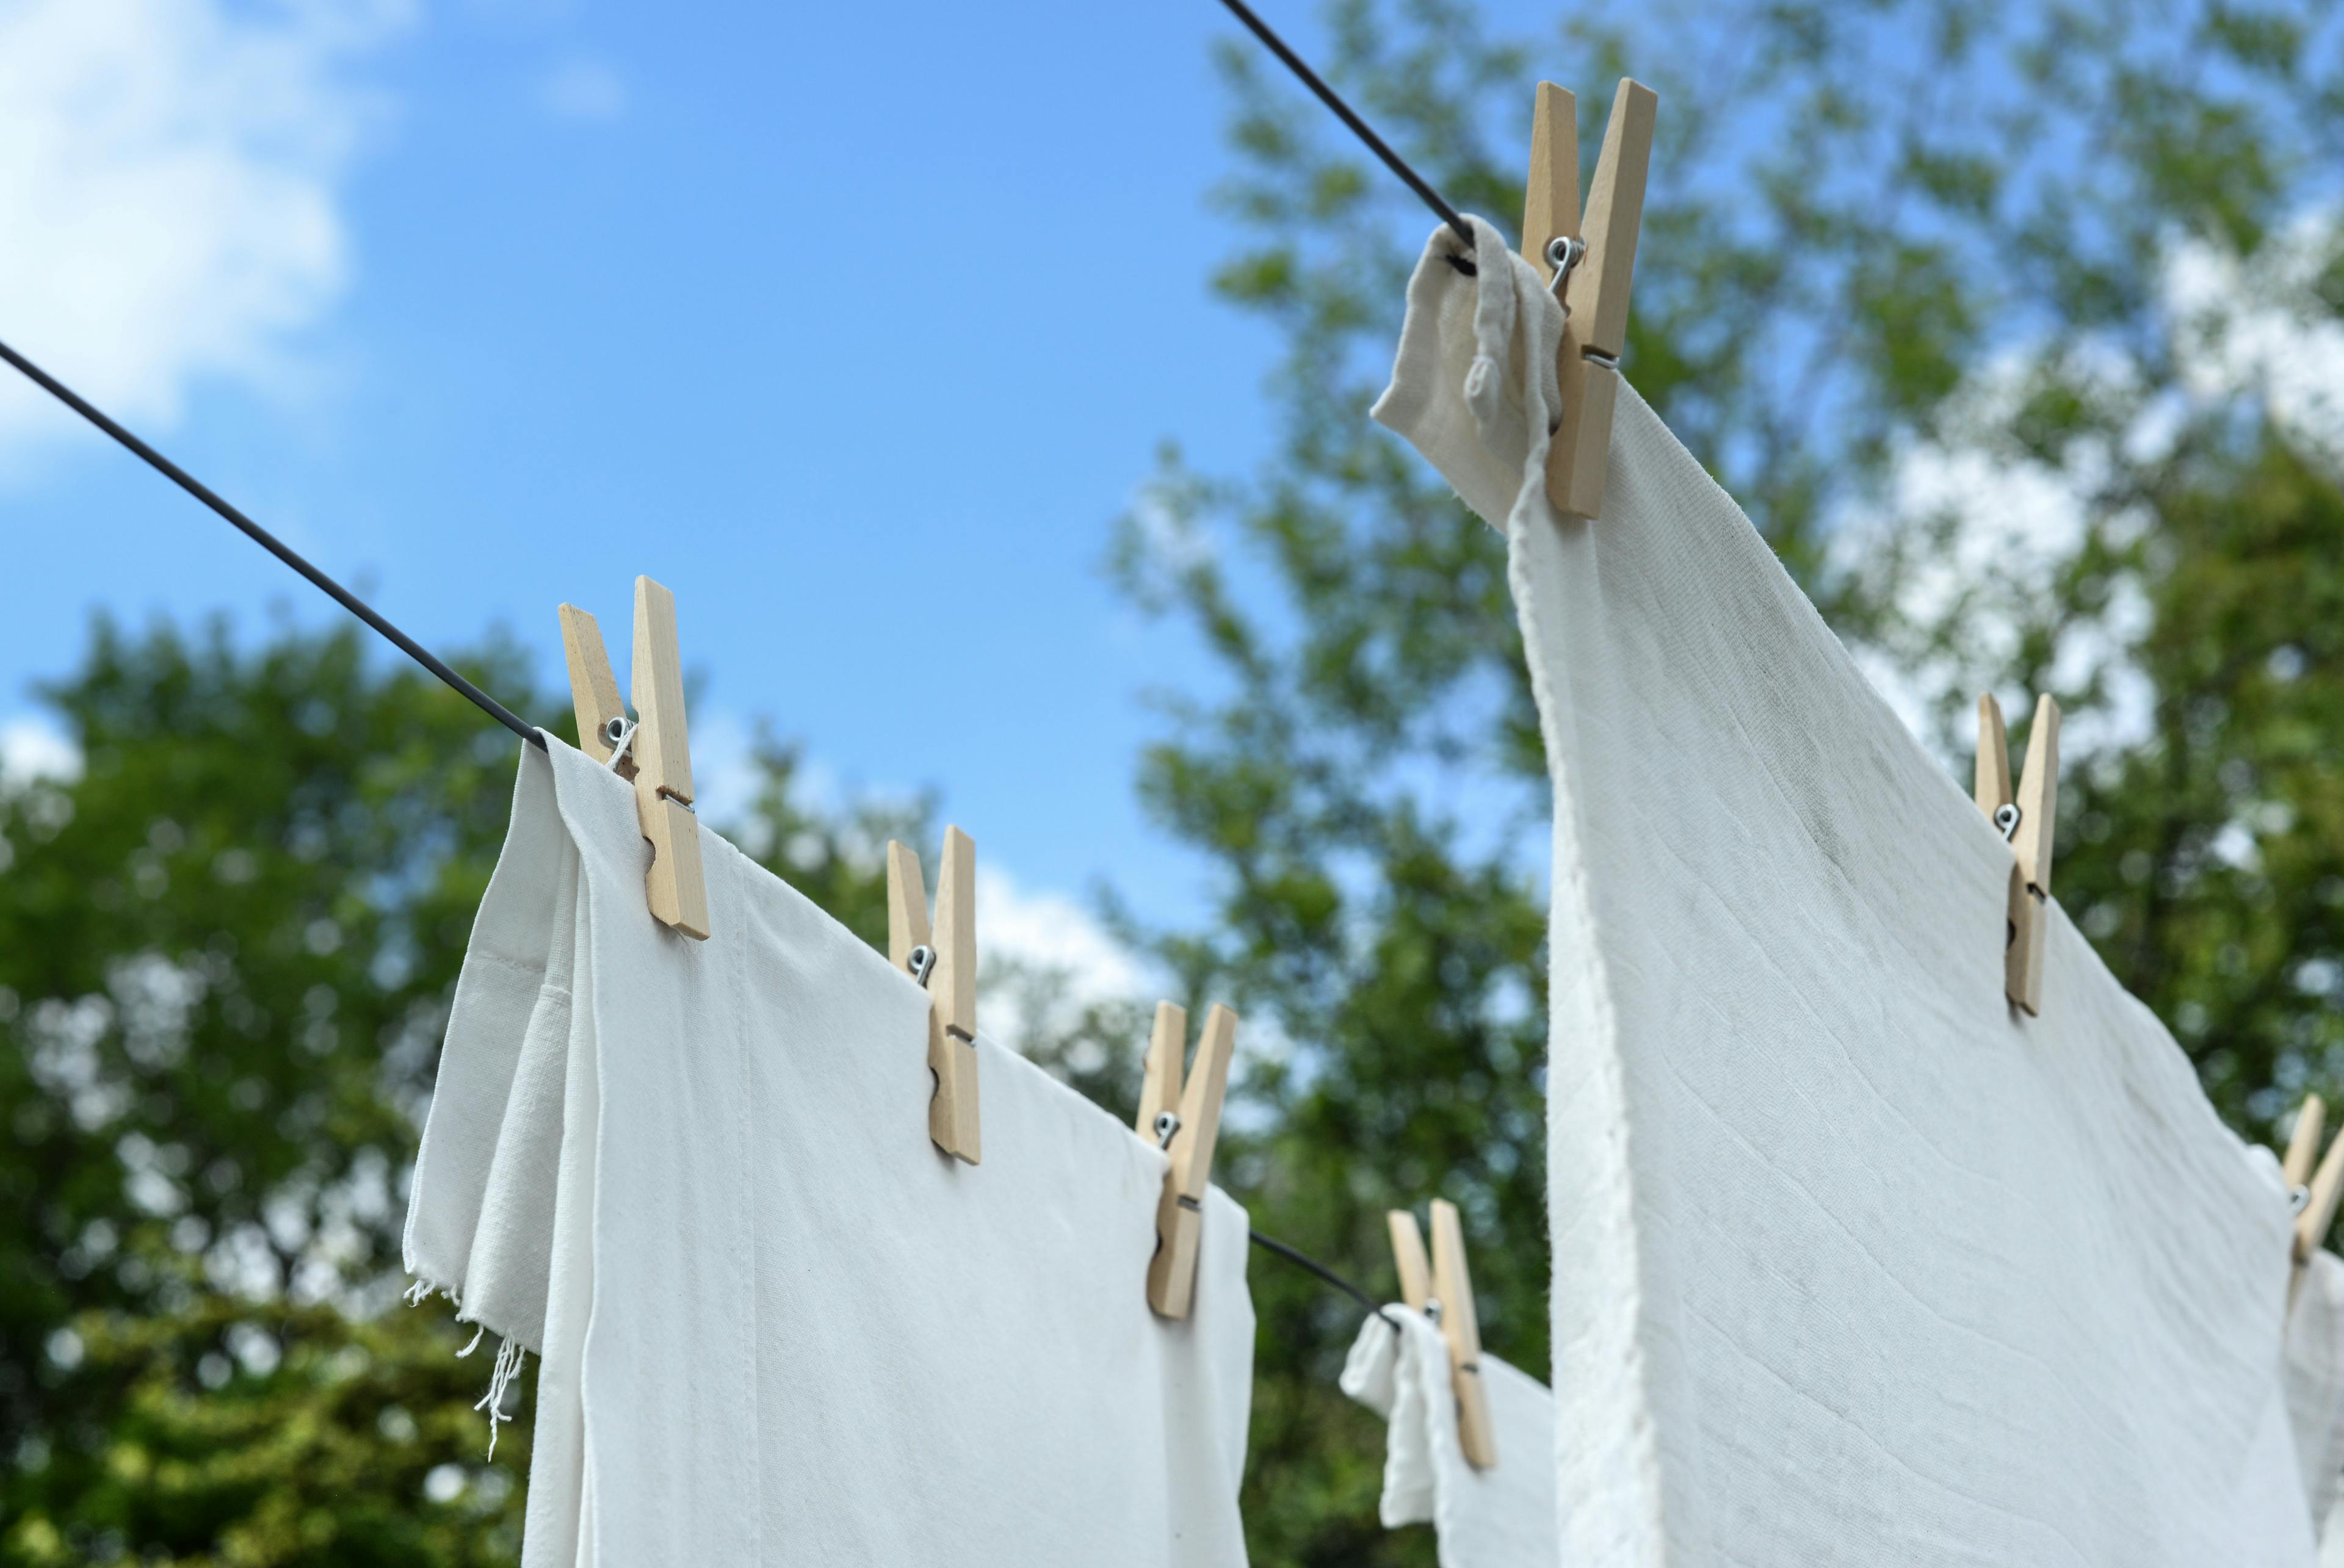 laundry hanging on drying clothesline